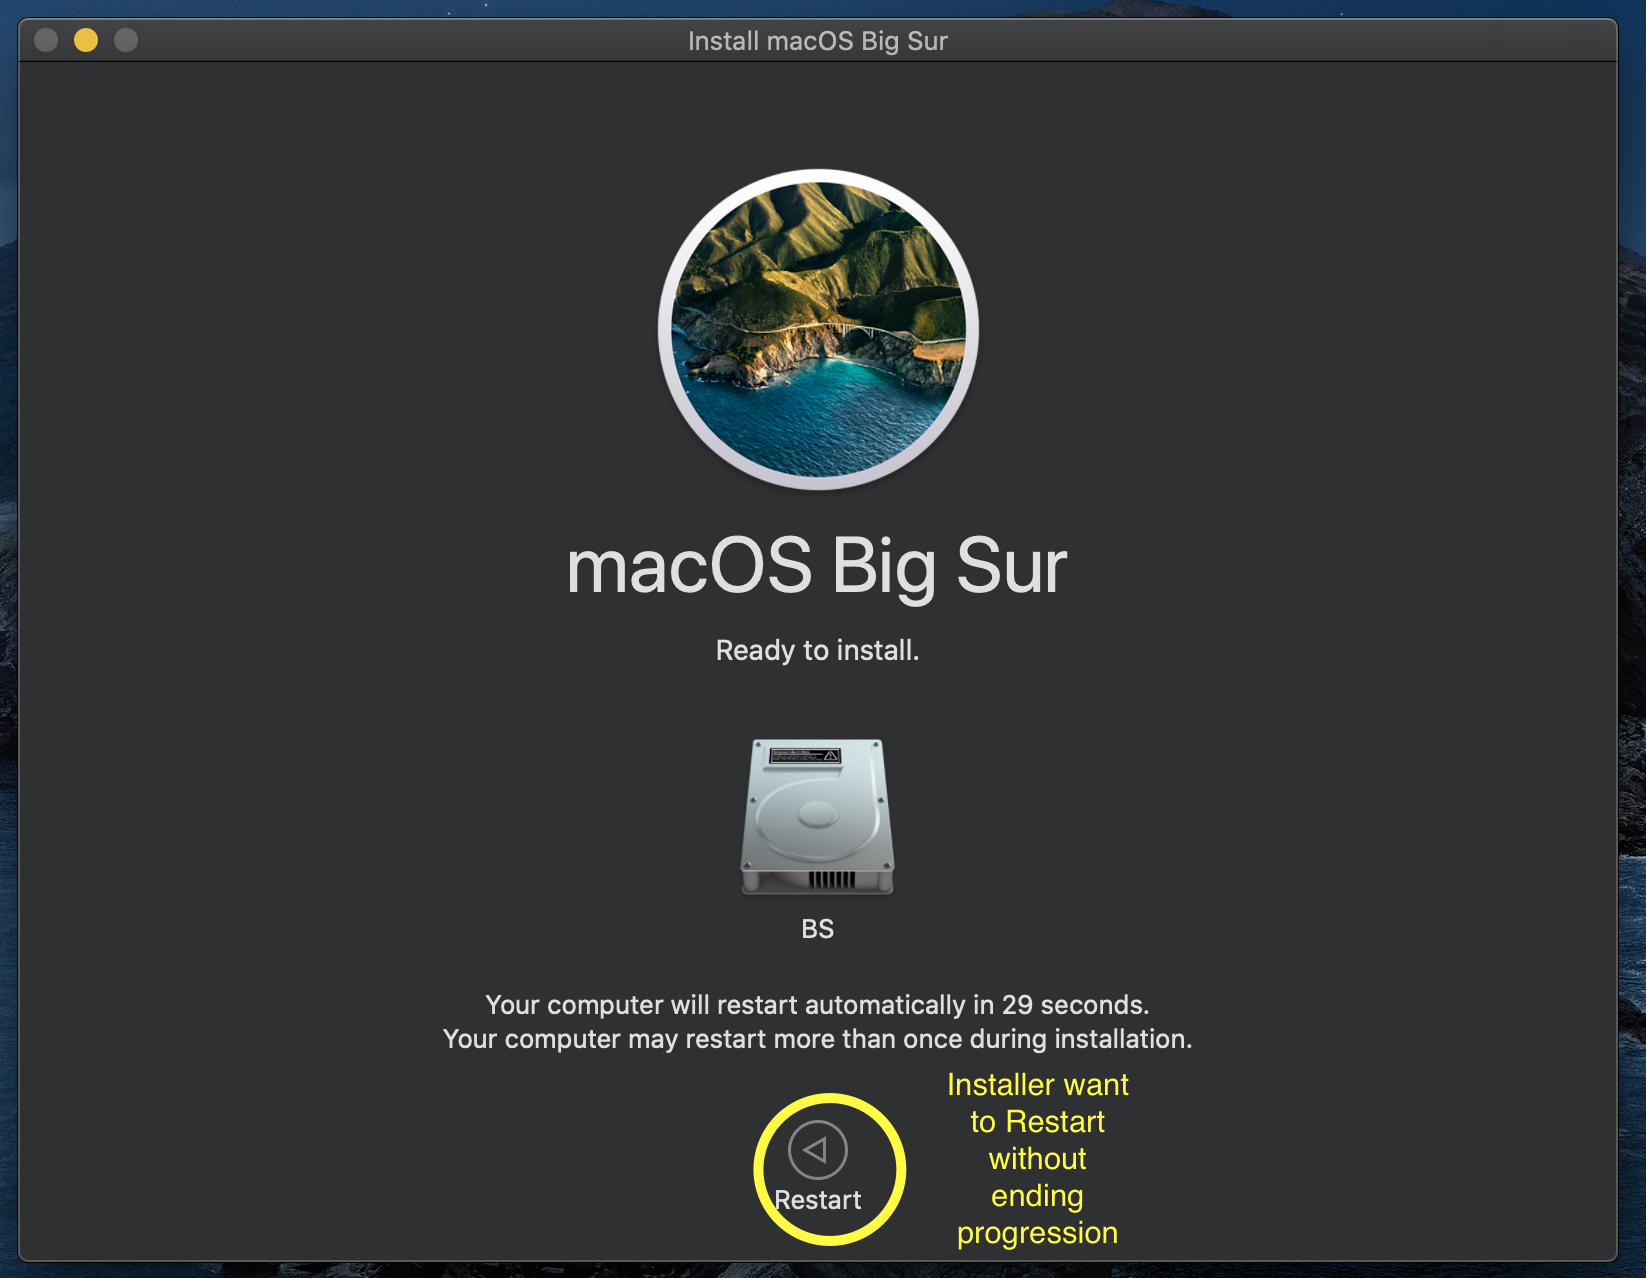 Imac bug :RyuSAK is not supported by this Mac (13.1) · Issue #44 ·  Ecks1337/RyuSAK · GitHub